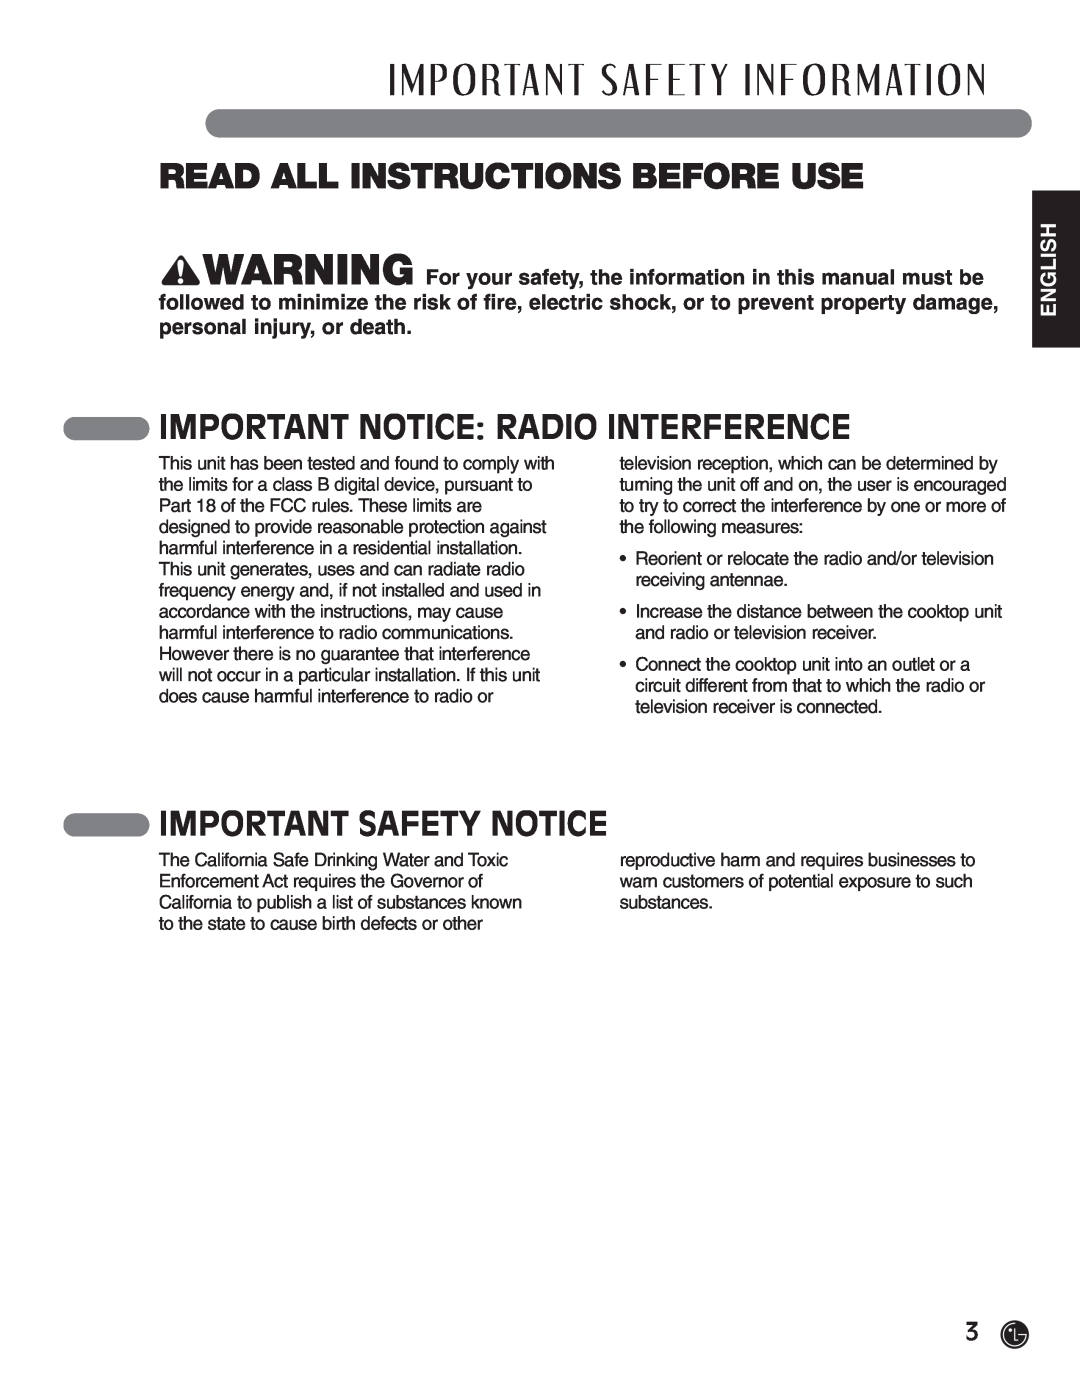 LG Electronics HN7413AG Read All Instructions Before Use, Important Notice Radio Interference, Important Safety Notice 